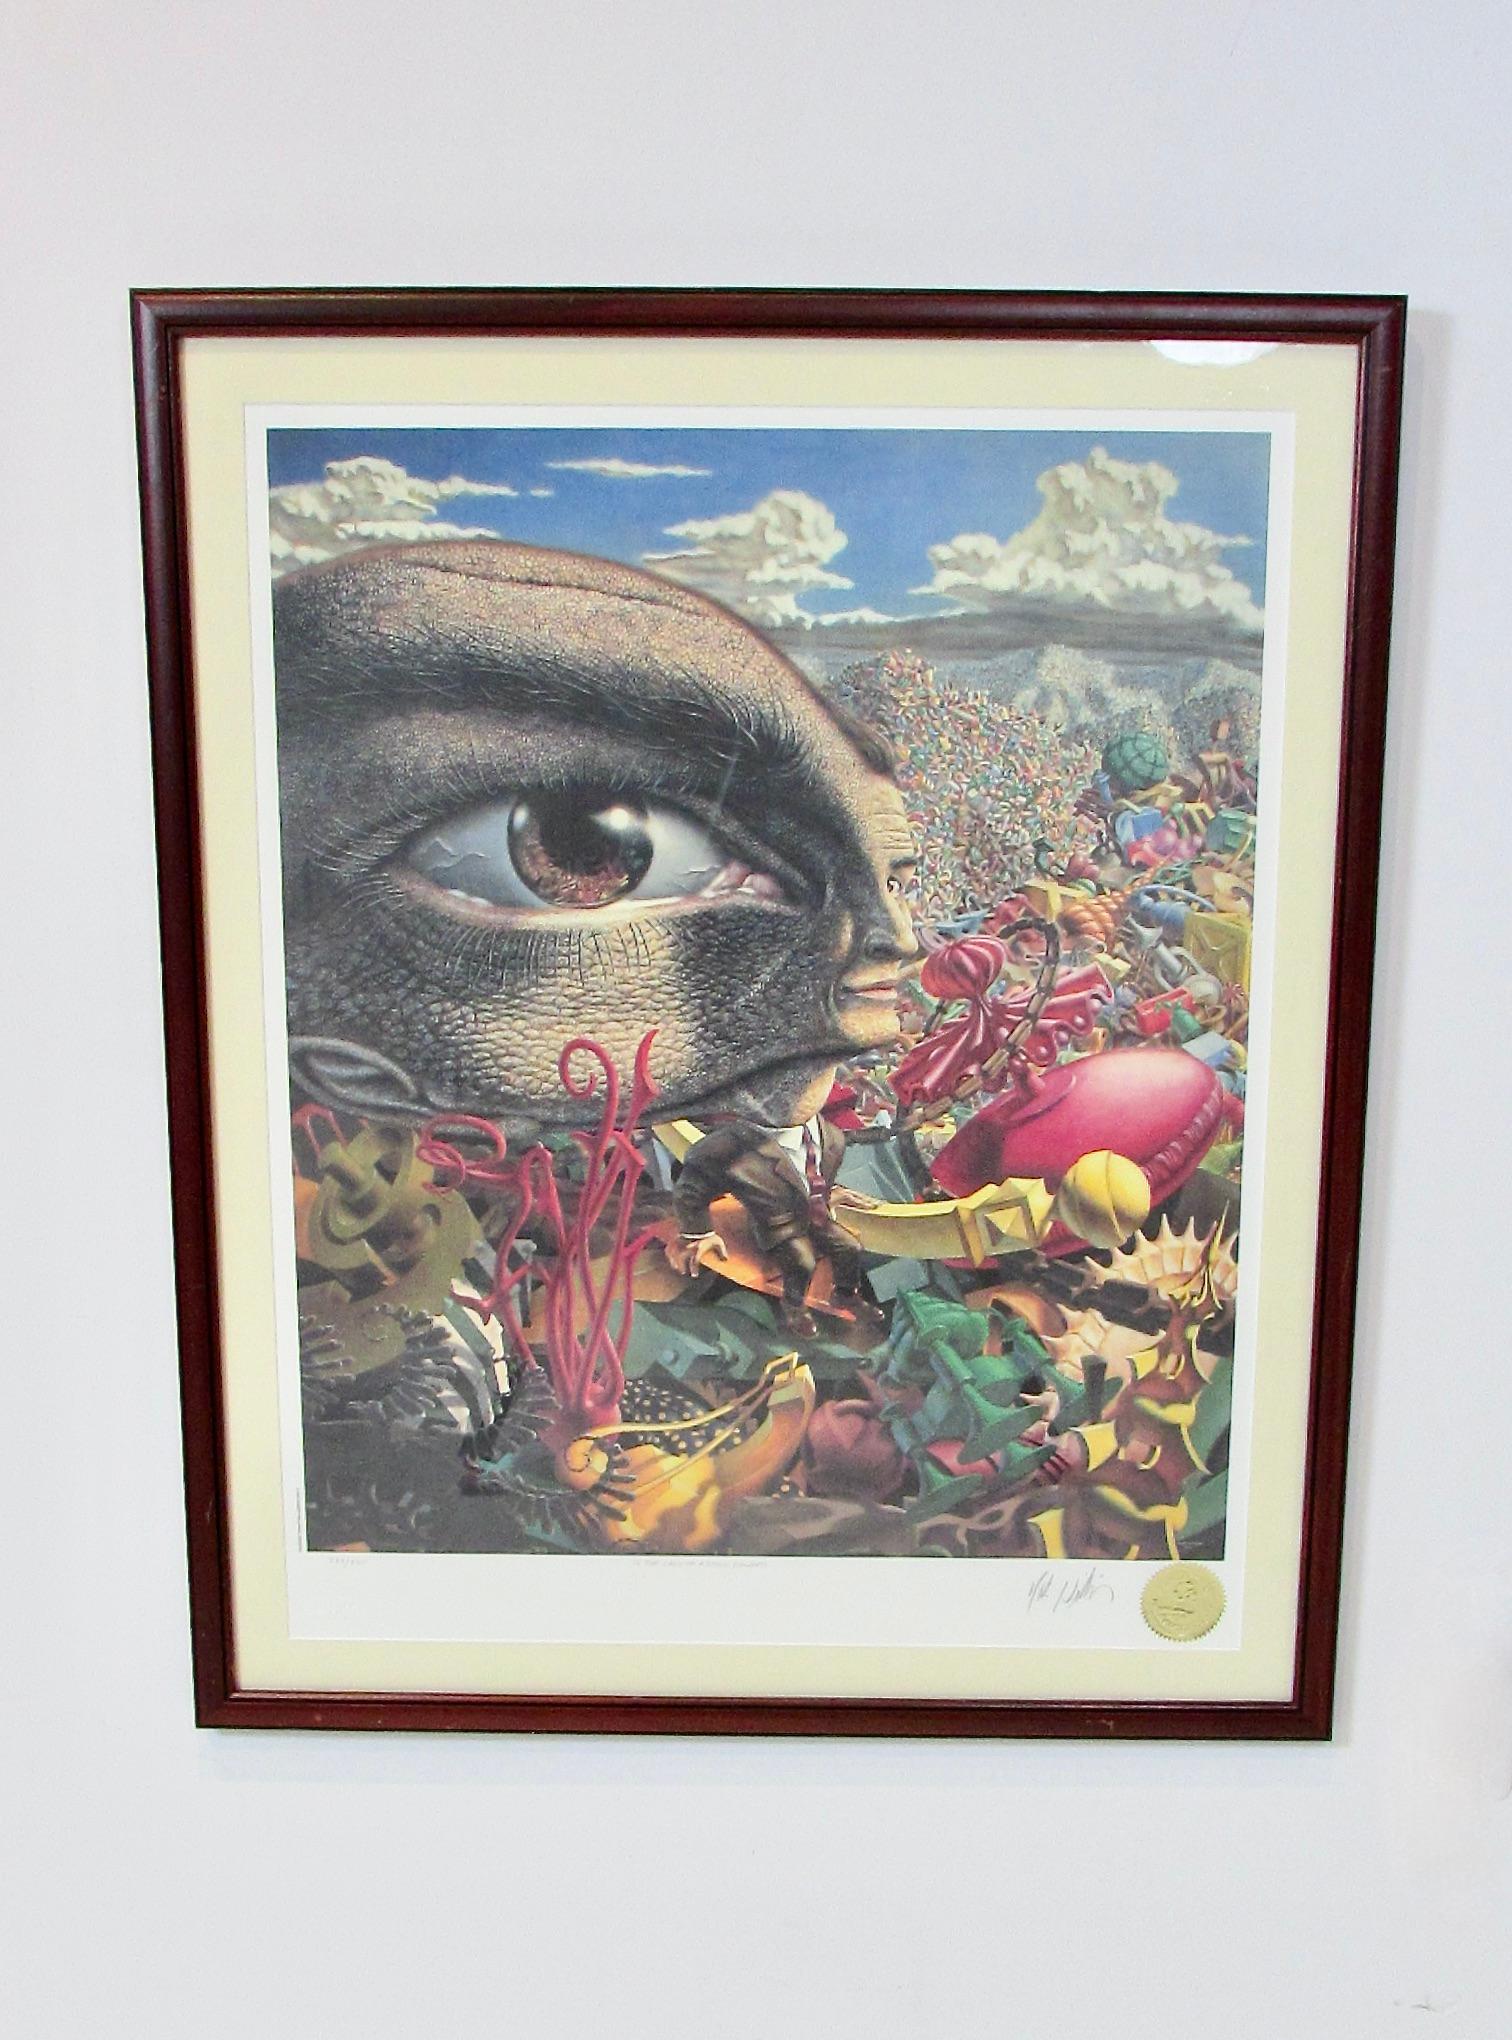 Signed numbered print of Robert Williams Land of Retinal Delights . Matted and framed .
Robert L. Williams, often styled Robt. Williams (born March 2, 1943), is an American painter, cartoonist, and founder of Juxtapoz Art & Culture Magazine.